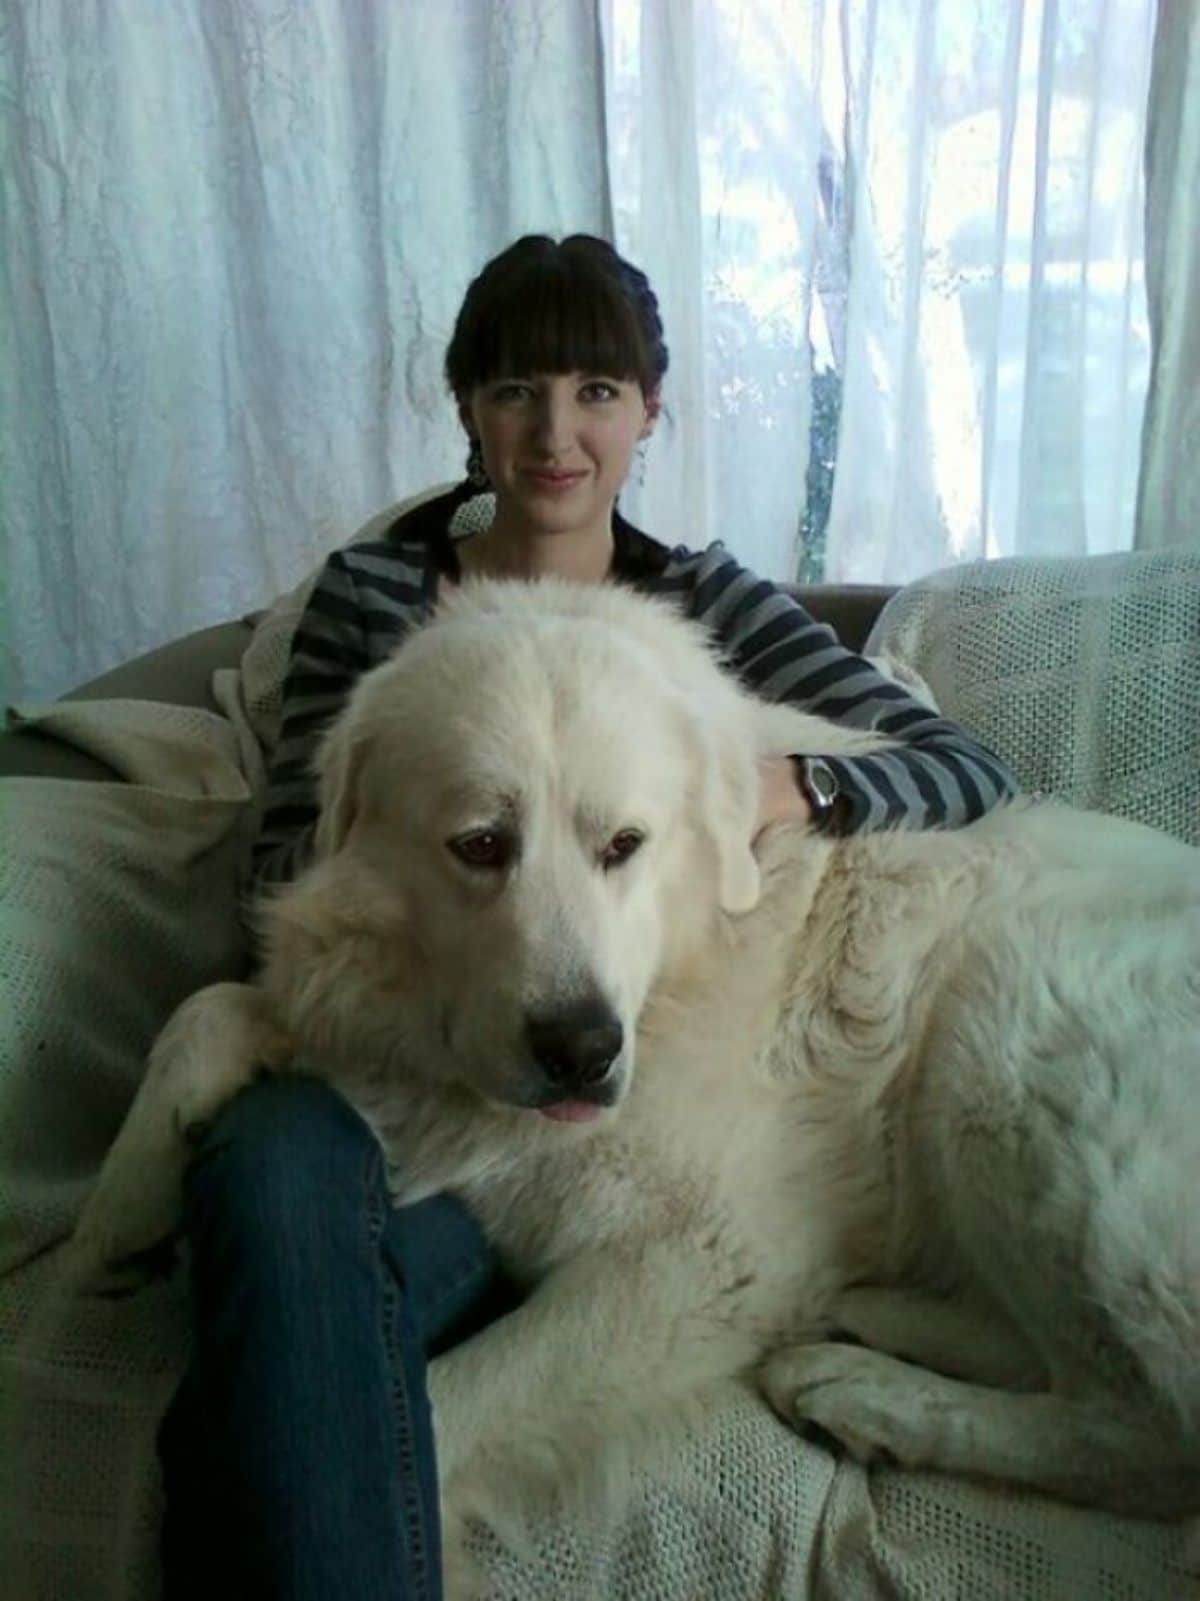 fluffy white dog laying on a woman sitting on a couch